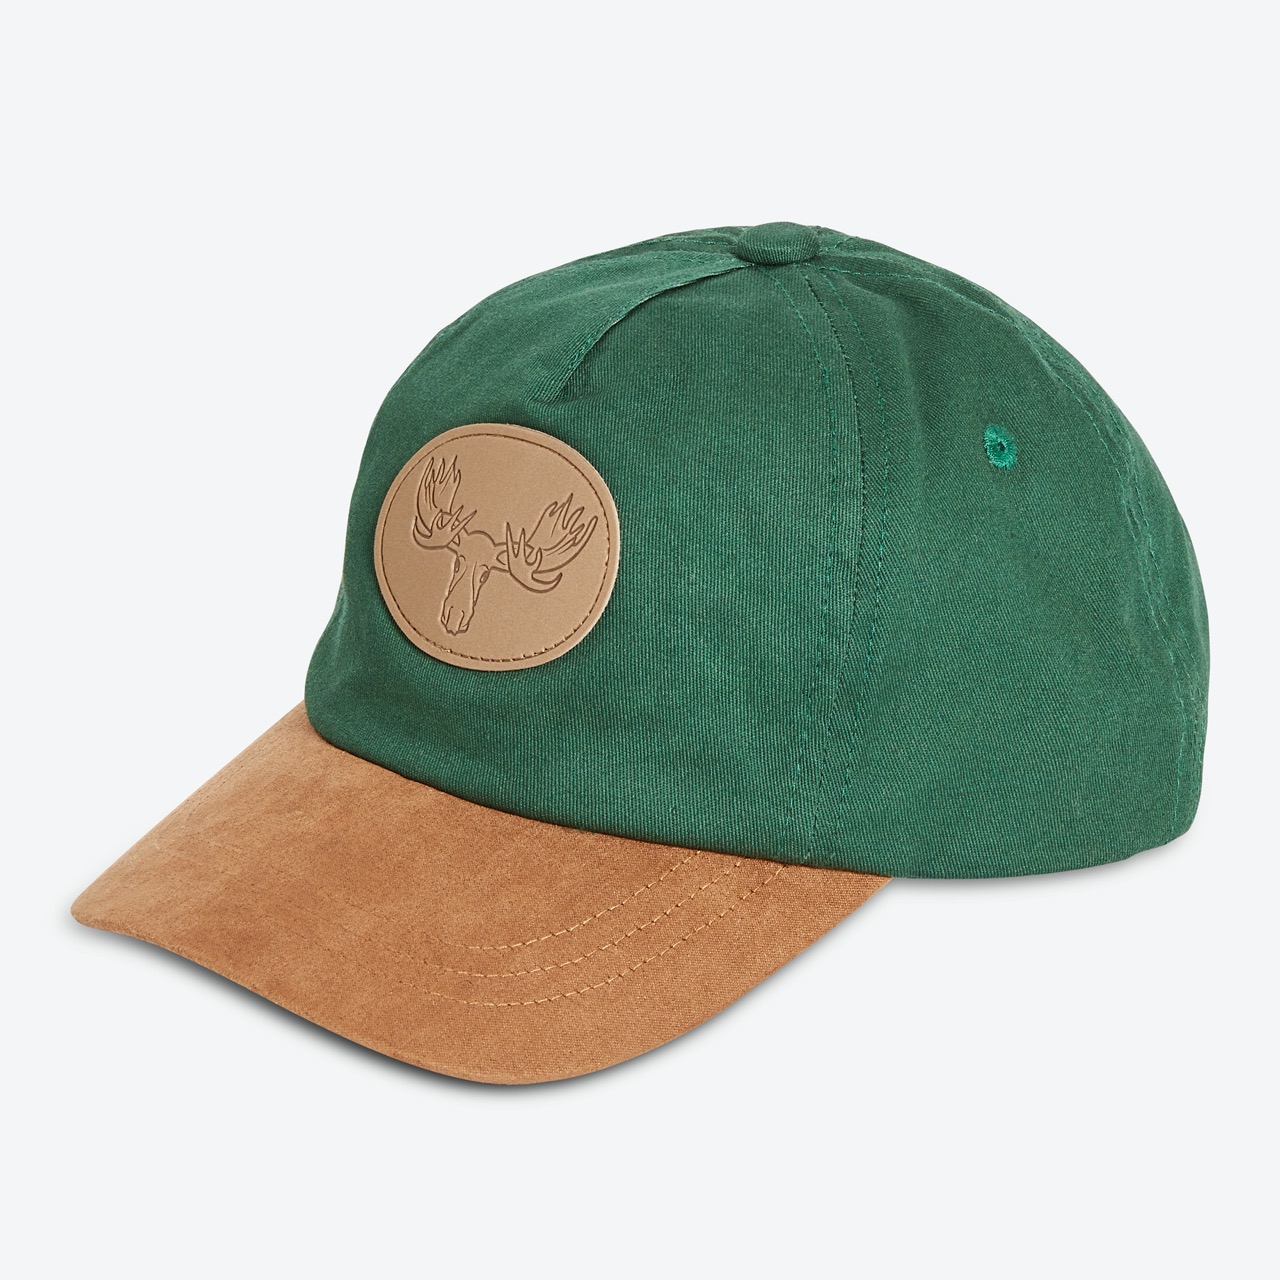 Faux leather cap large - stylish, budget-friendly back-to-school essentials from joe fresh